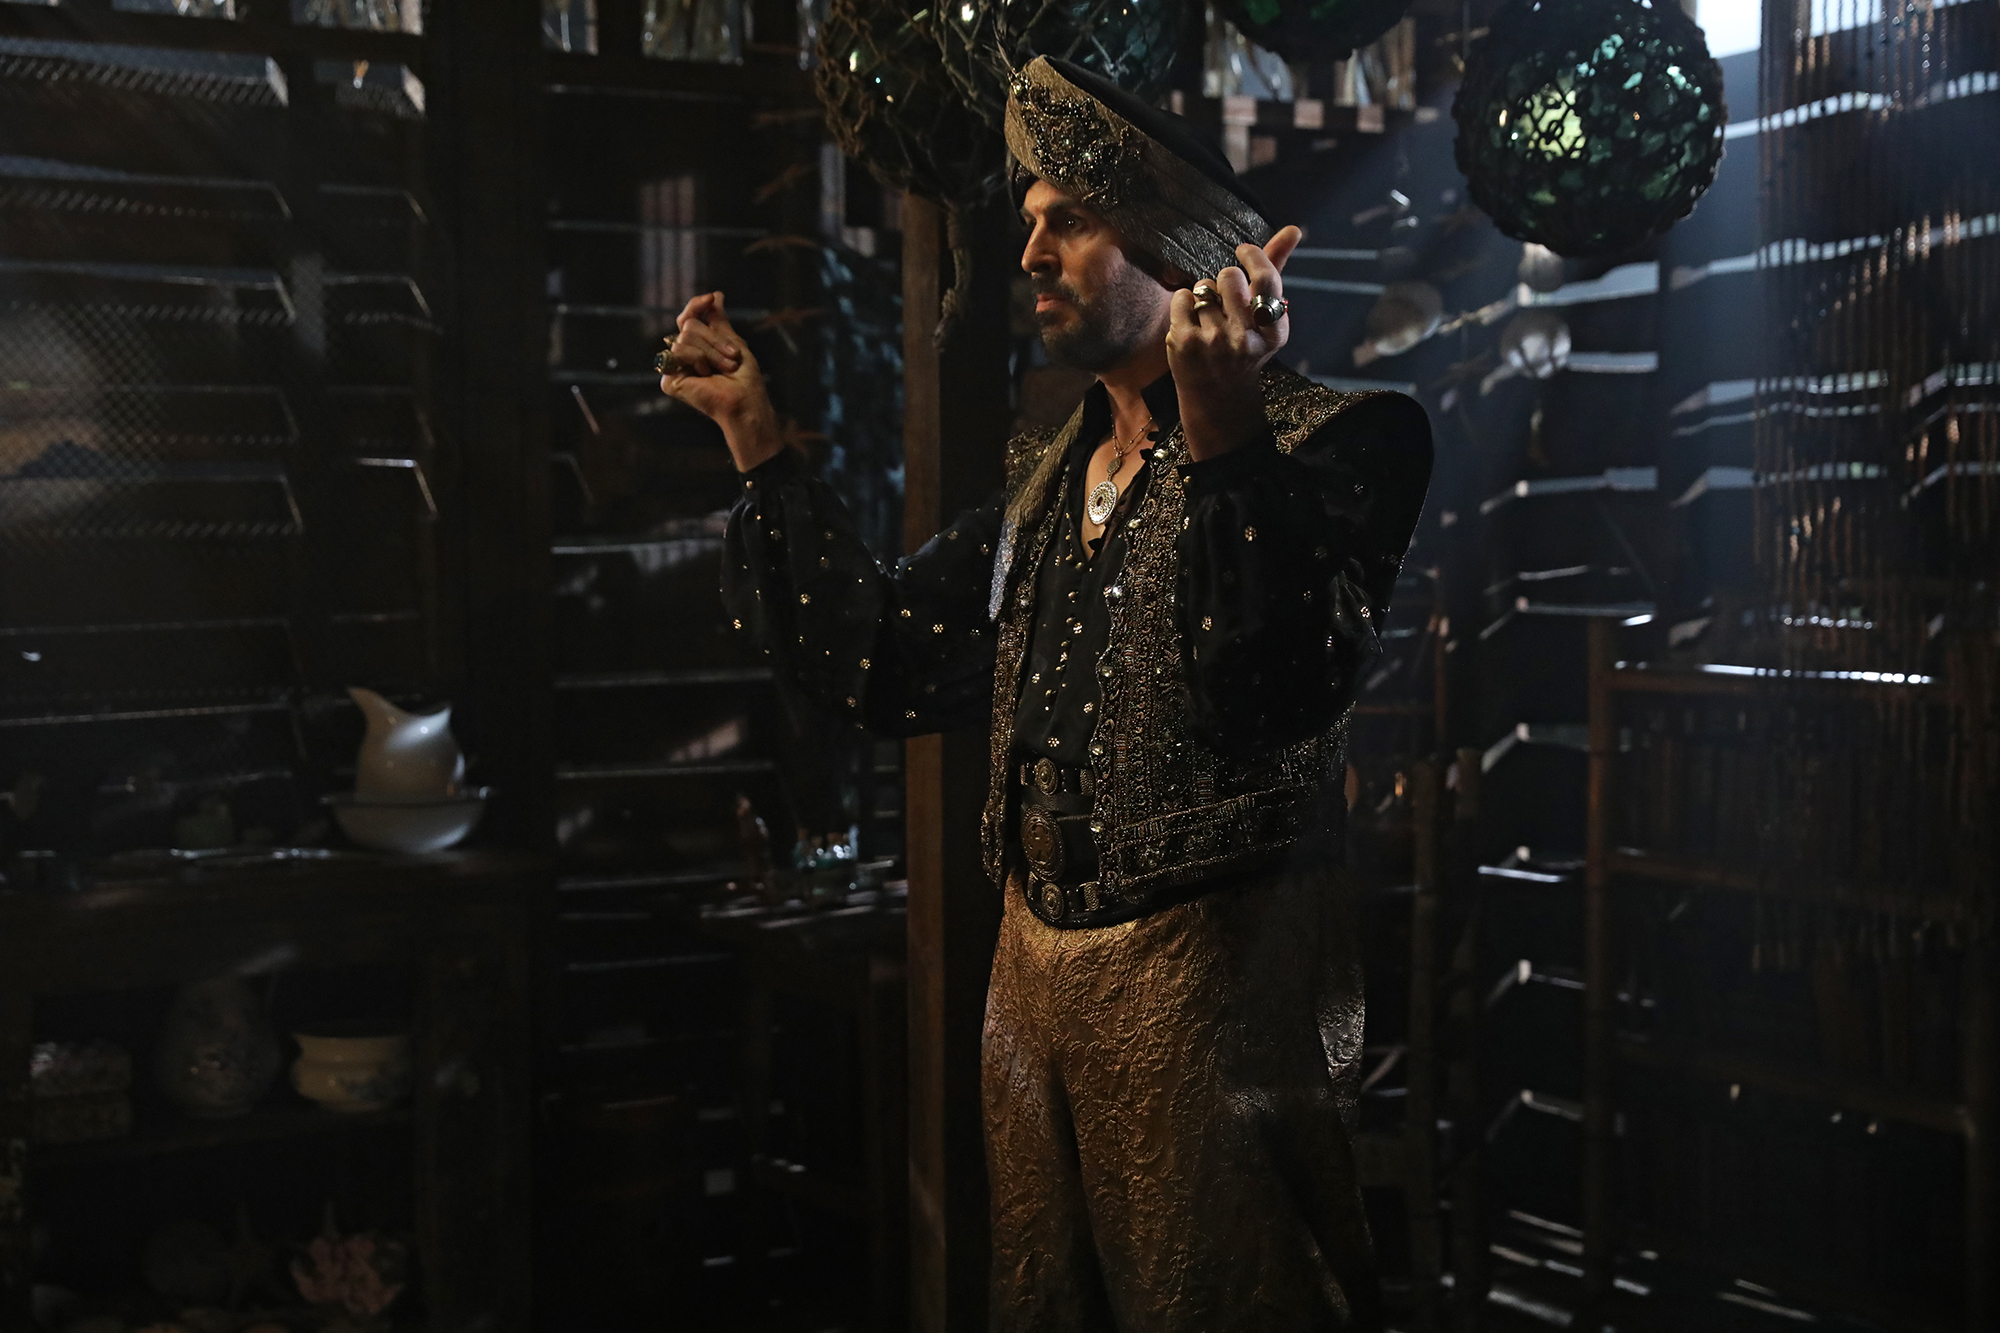 Image Once Upon A Time 6x14 A Wondrous Place Photography Jafar Disney Wiki 